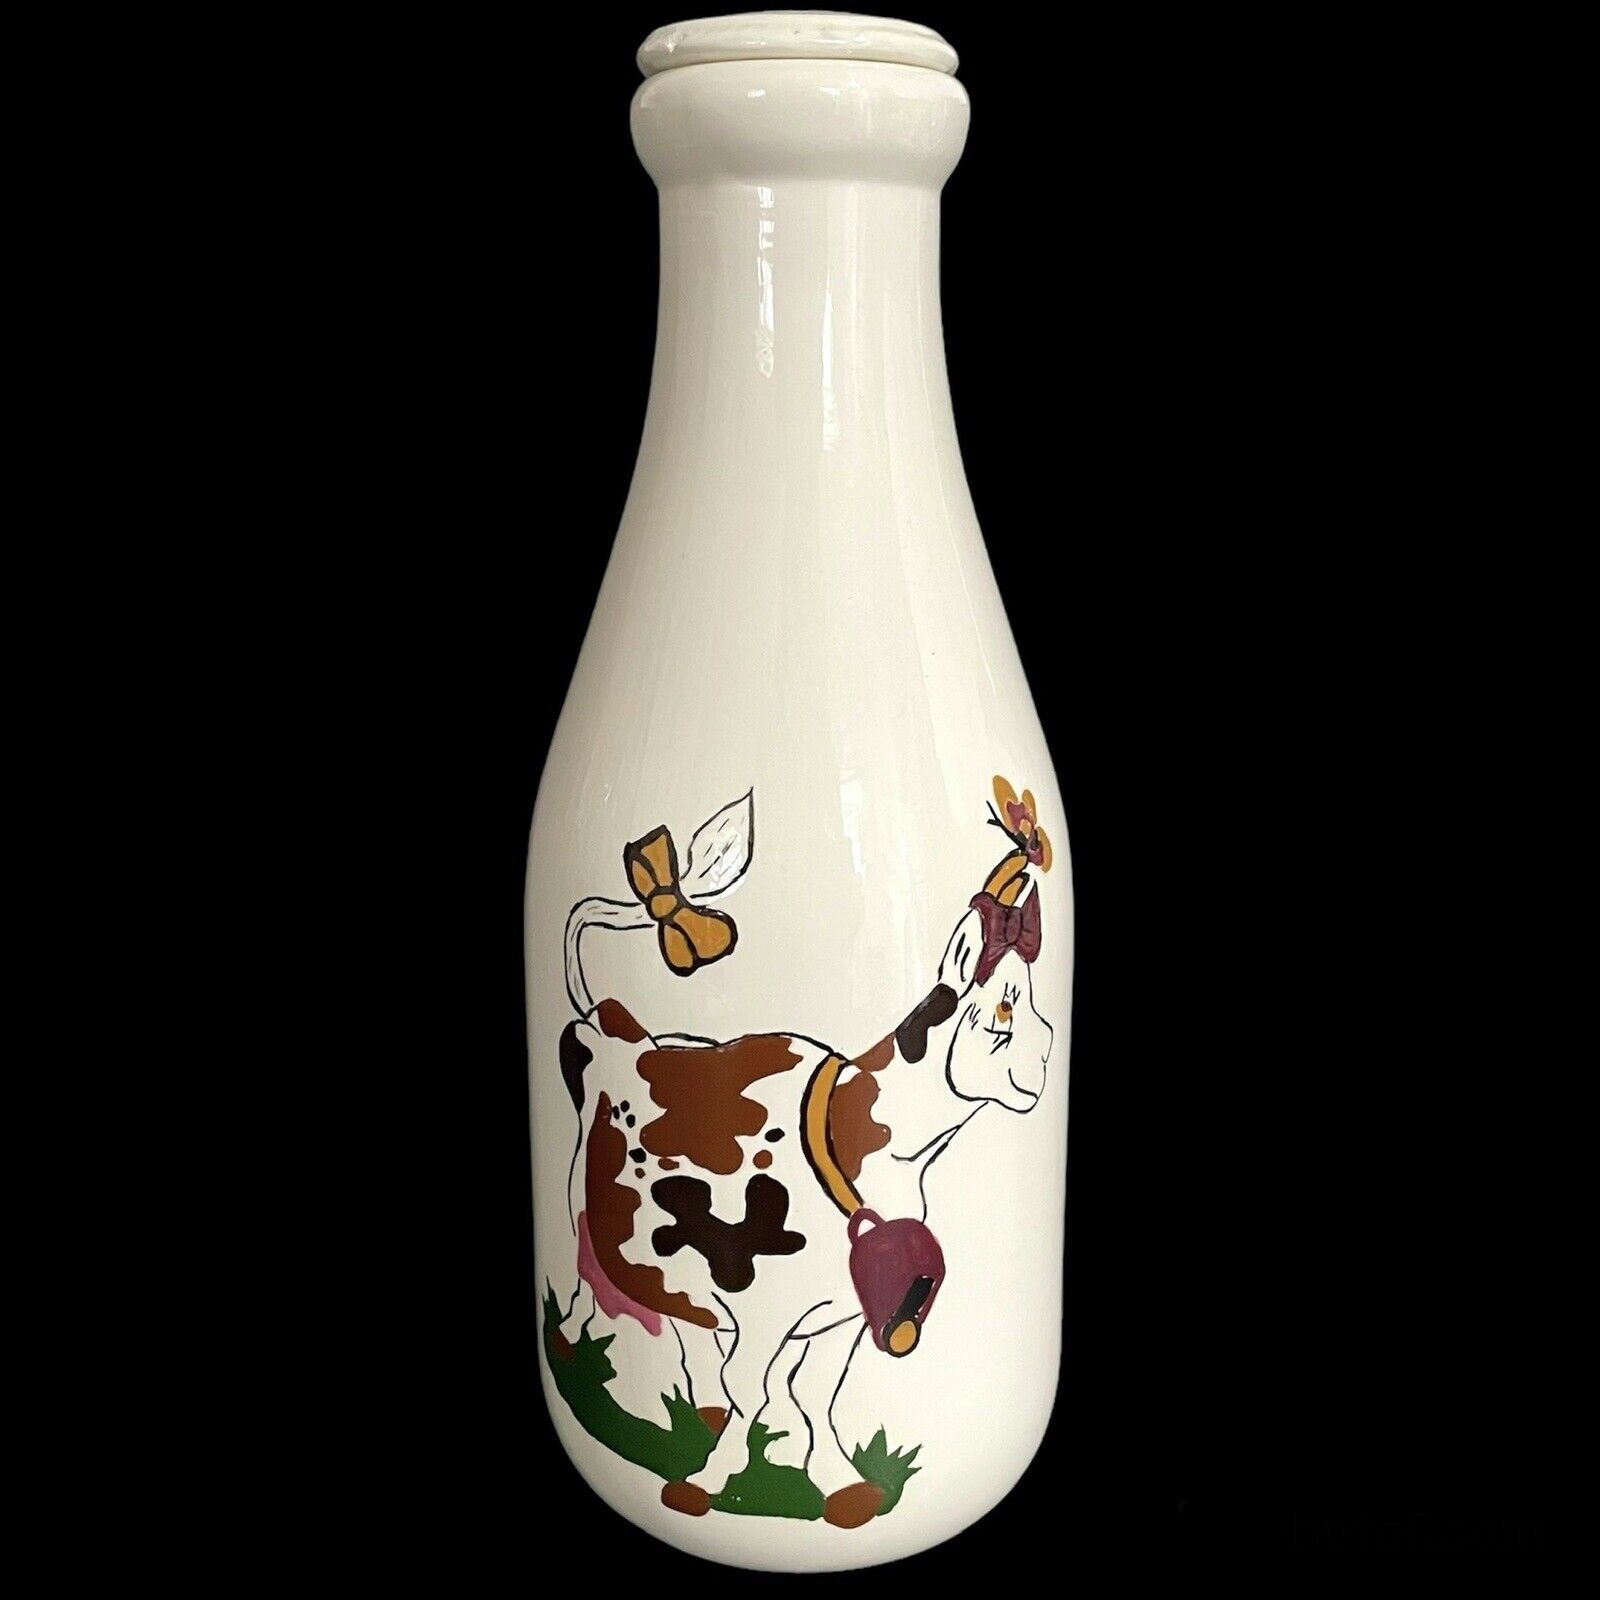 Vintage 1980s Hand Painted Cows on Ceramic Milk Bottle Glossy White Stopper Rare